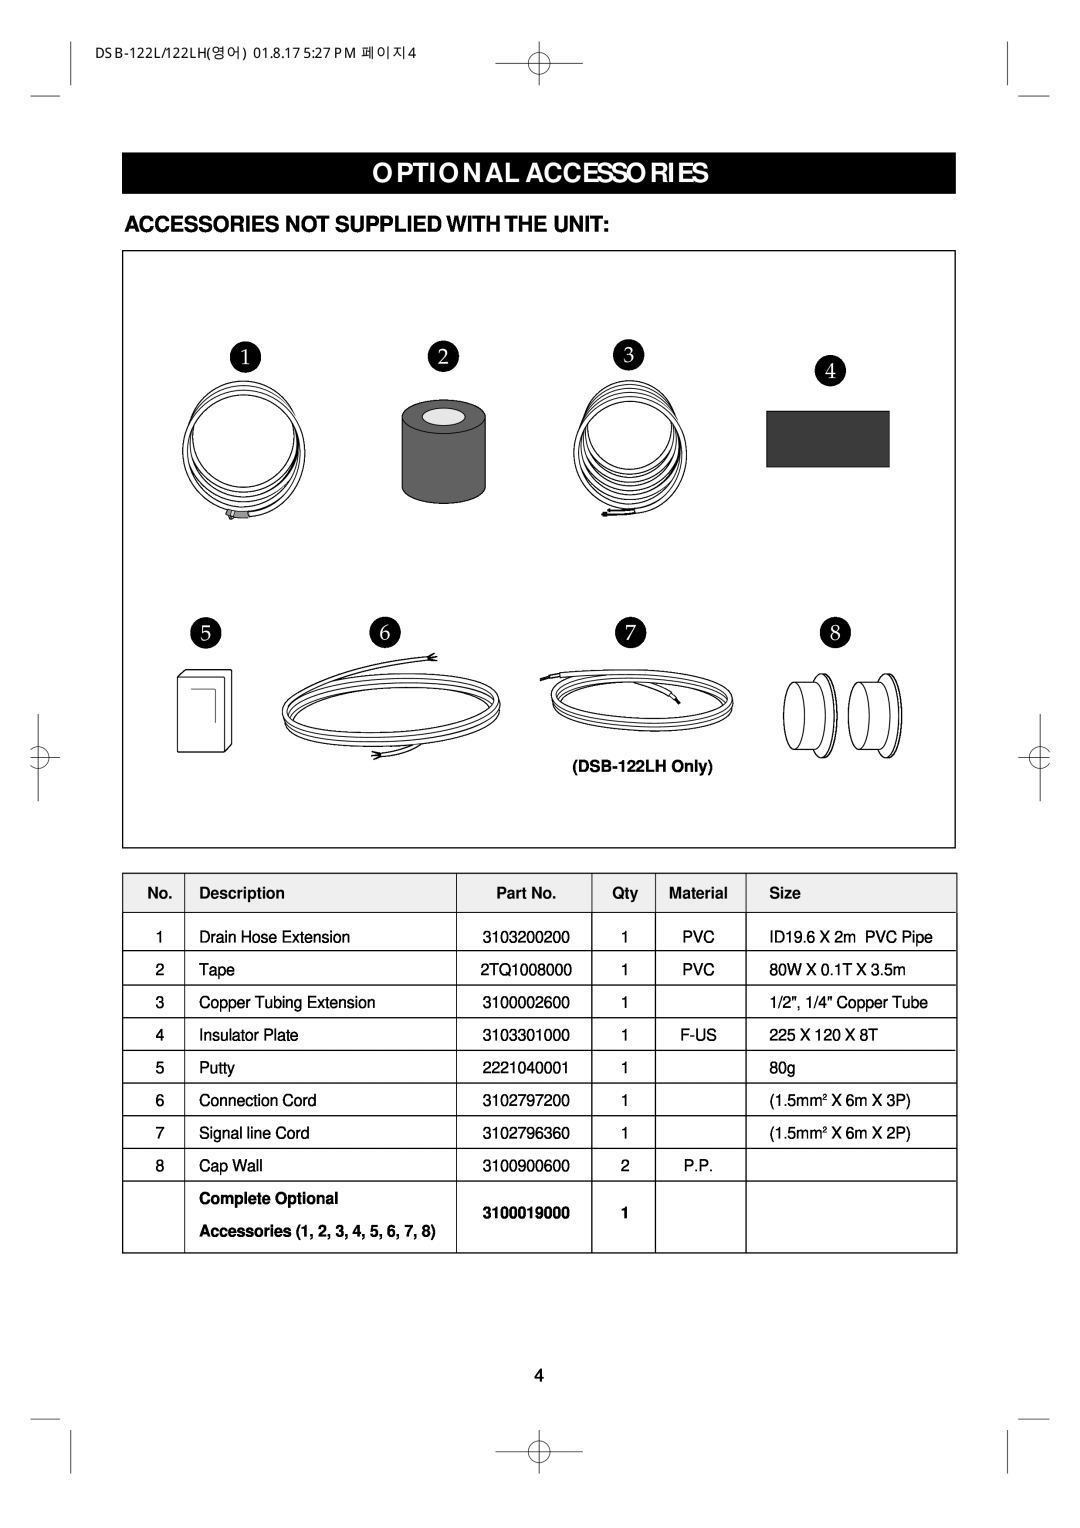 Daewoo Optional Accessories, Accessories Not Supplied With The Unit, DSB-122LH Only, Material, Size, Complete Optional 